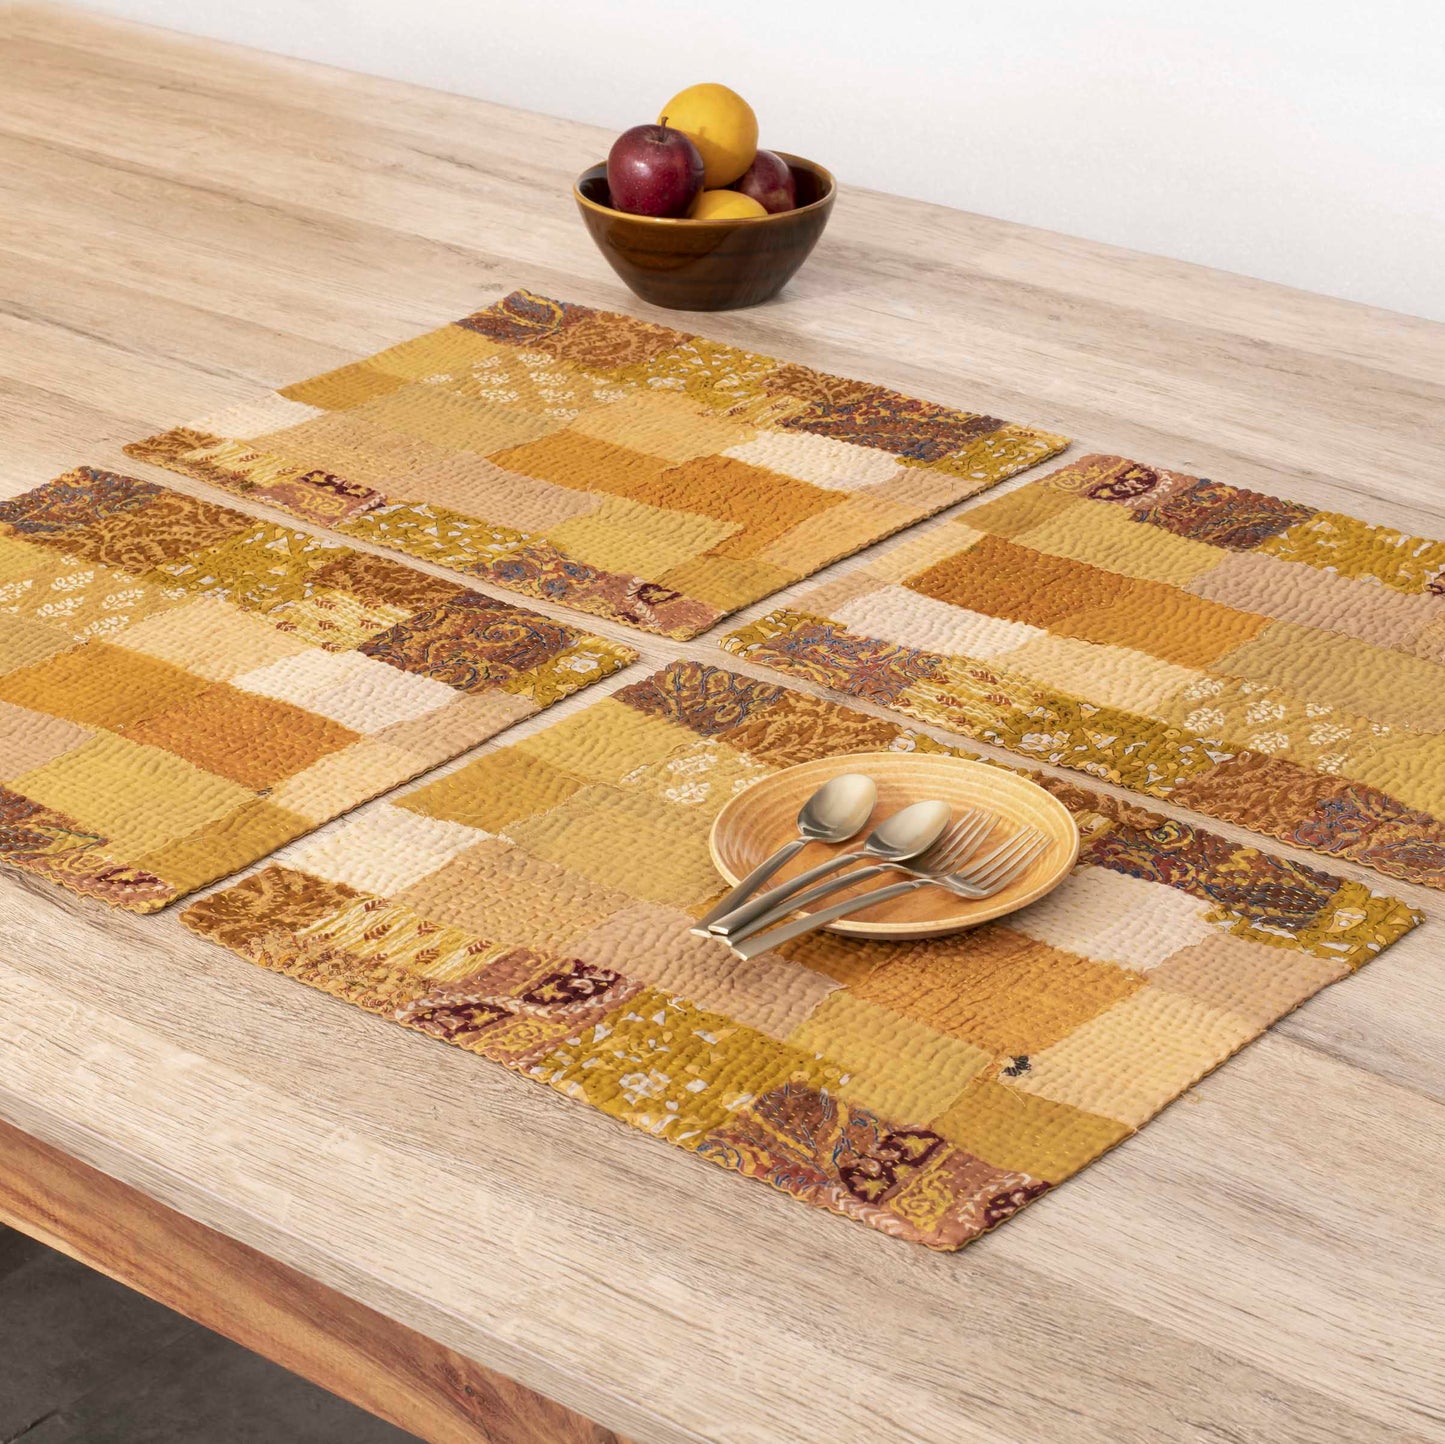 Printed Fray Handmade Placemats - Golden (Set of 2)